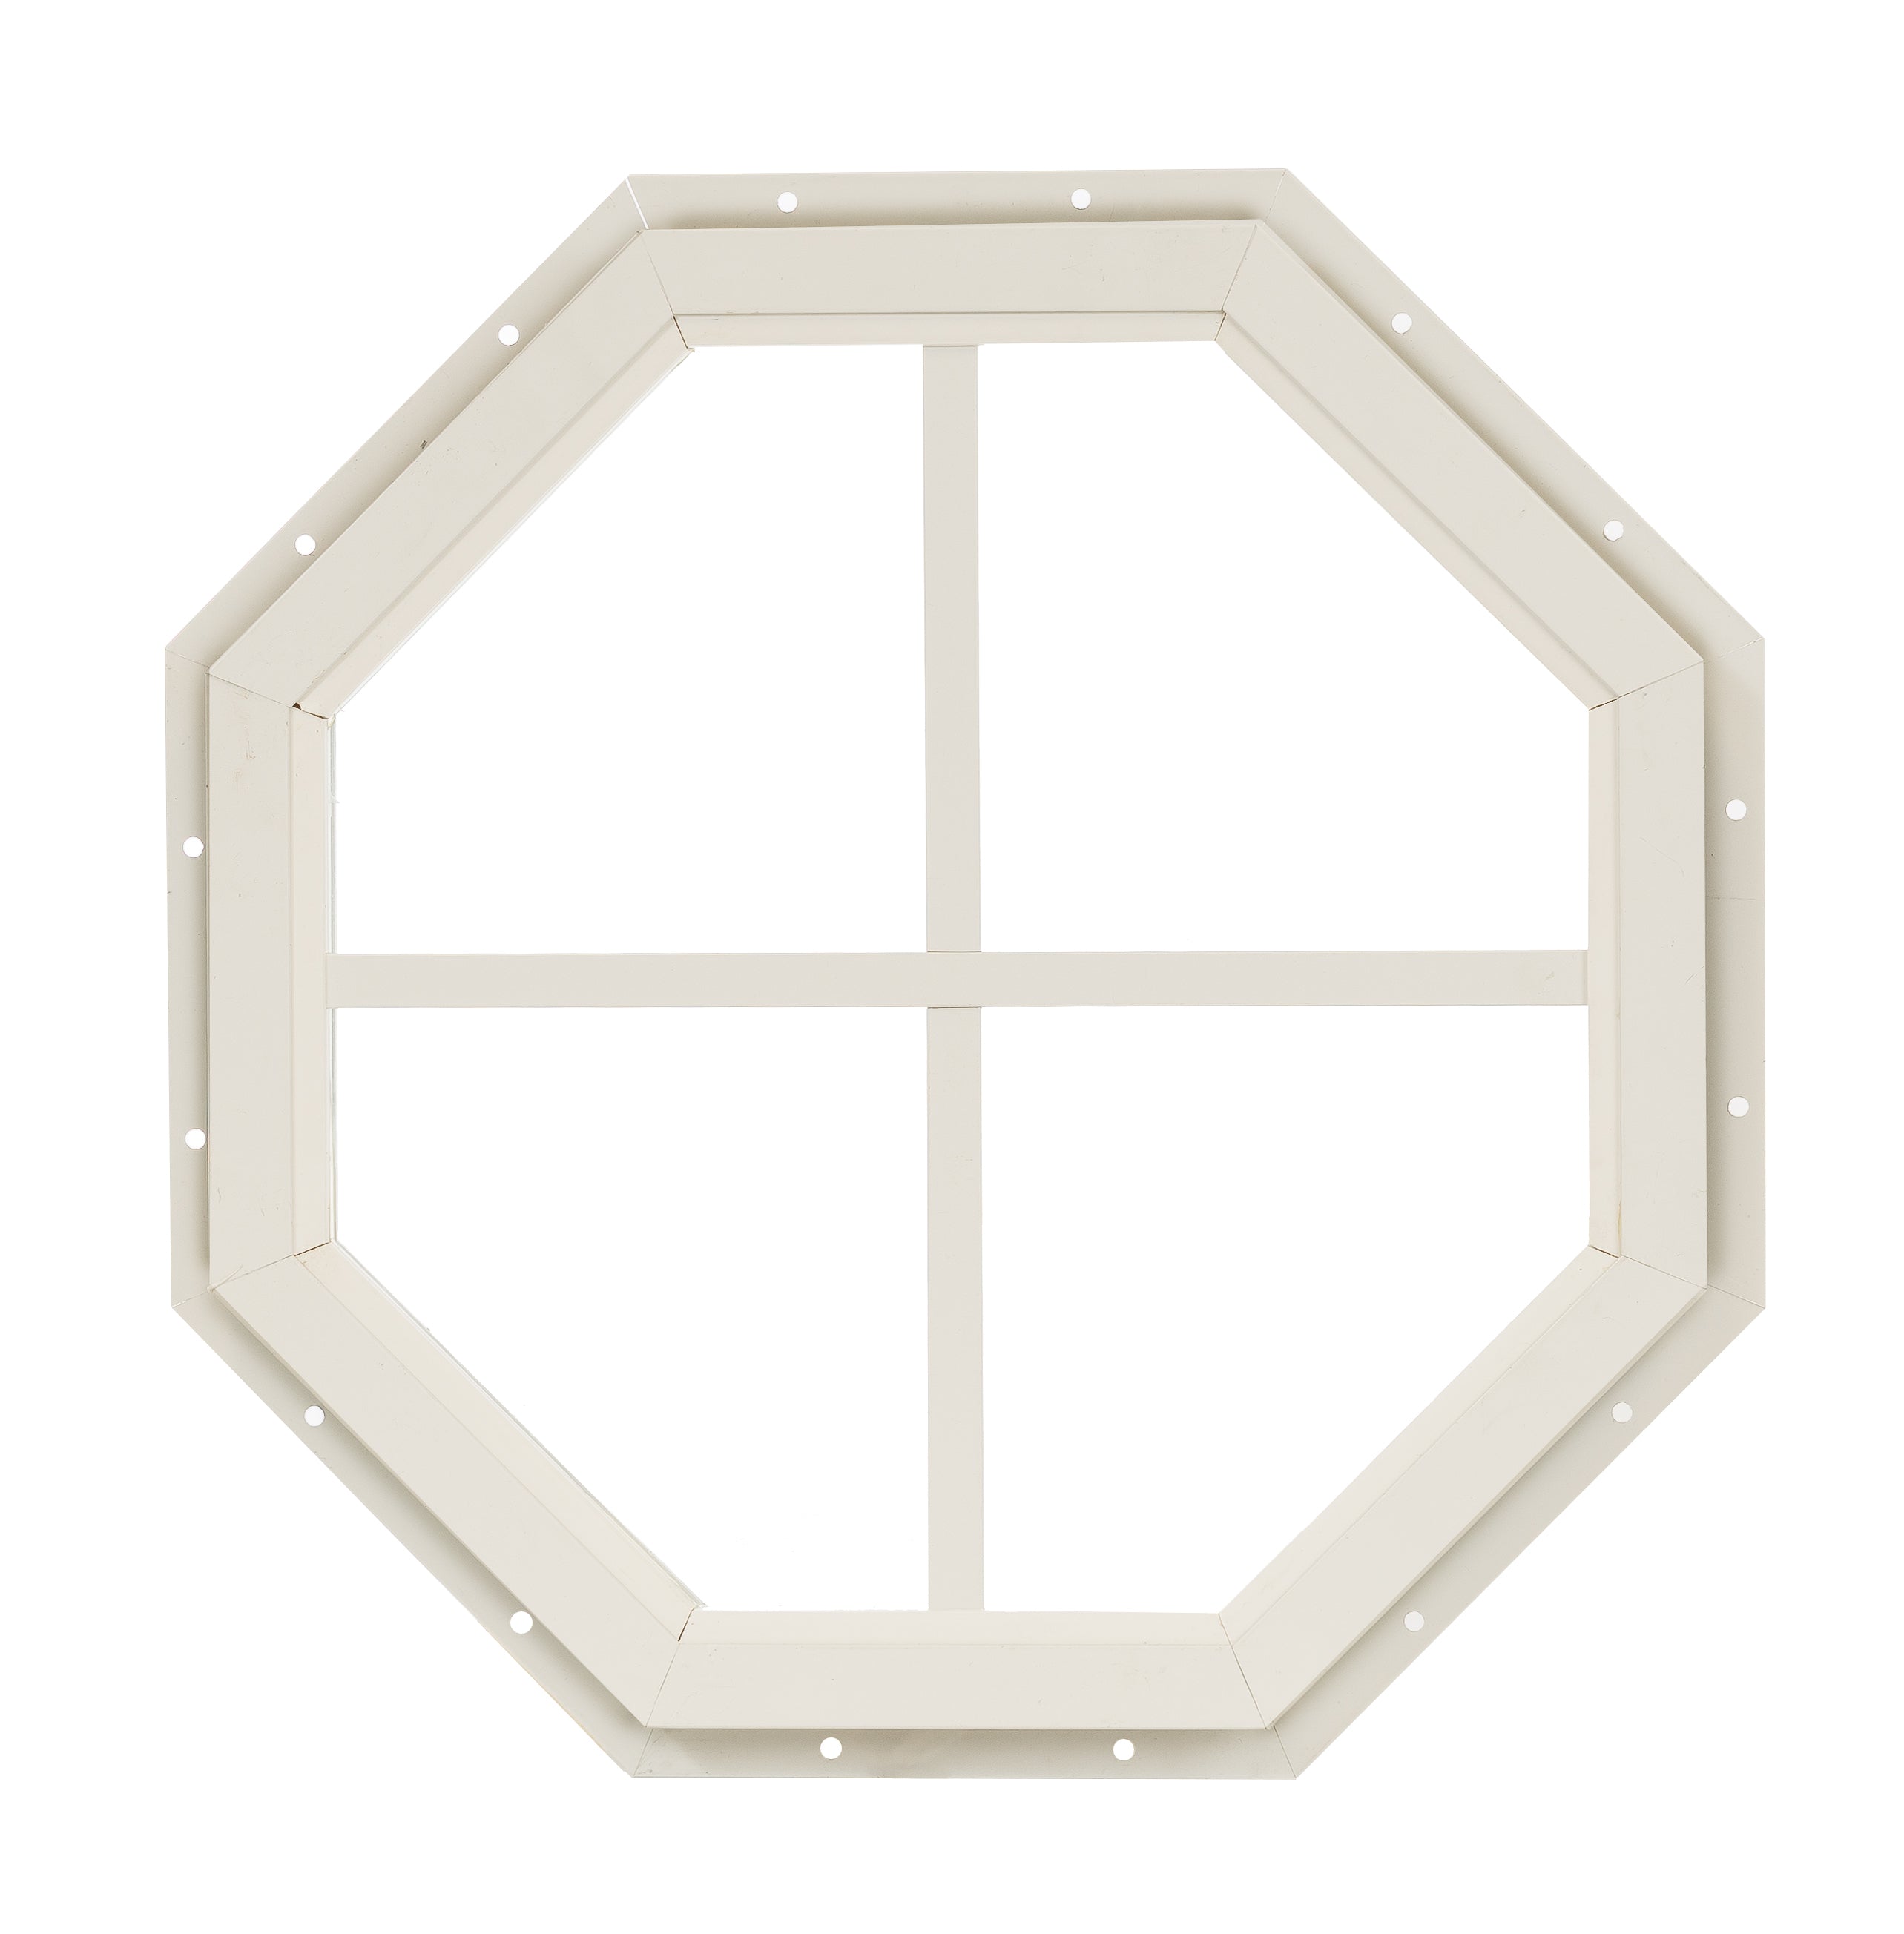 14" Octagon Gable J-Lap Mount White Window for Sheds, Playhouses, and MORE